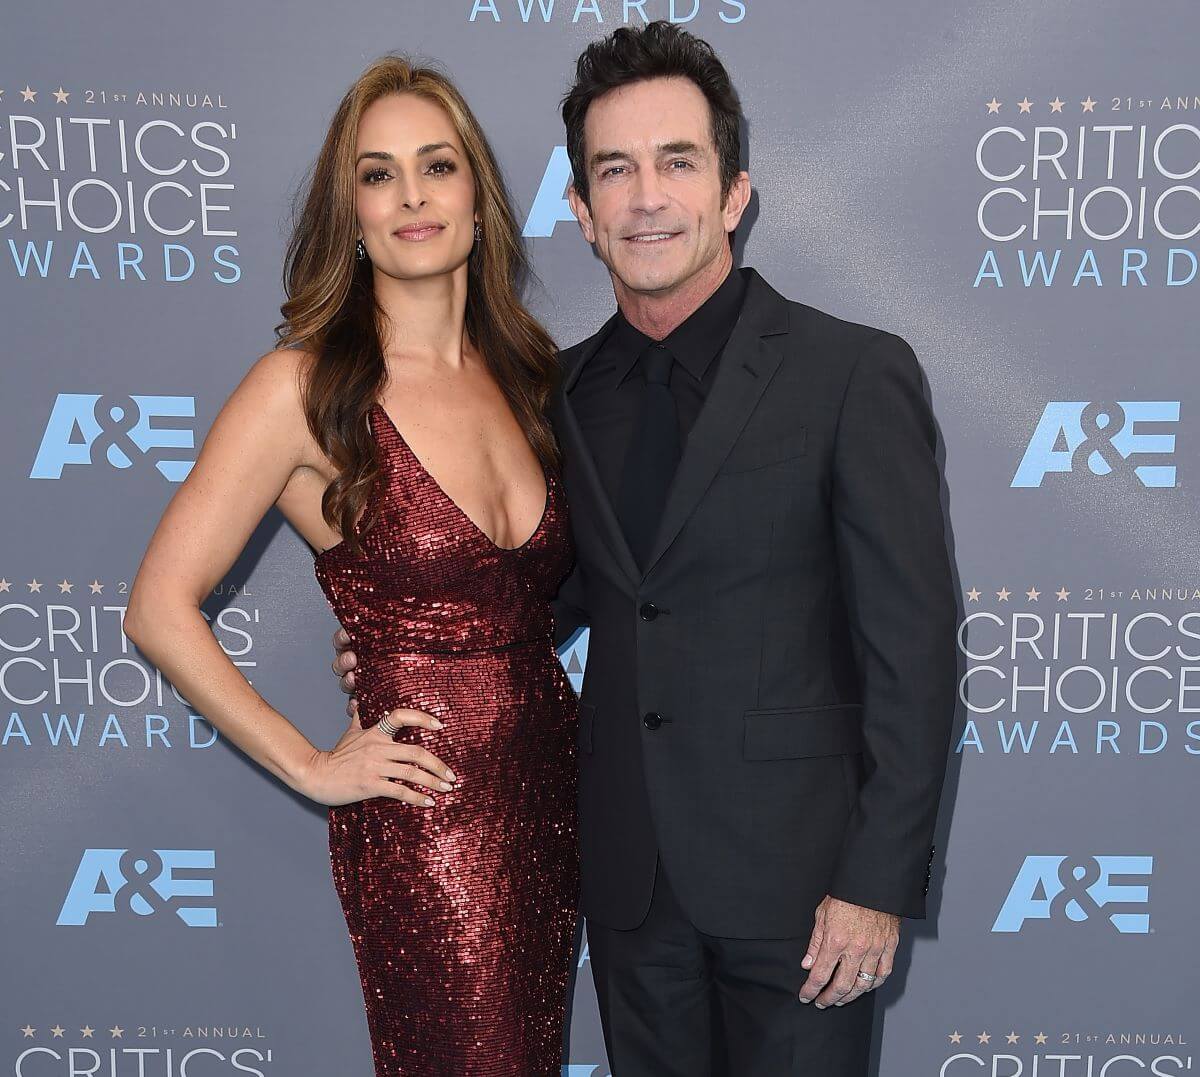 Lisa Ann Russell wears a red dress and stands with Jeff Probst, who wears a black suit.